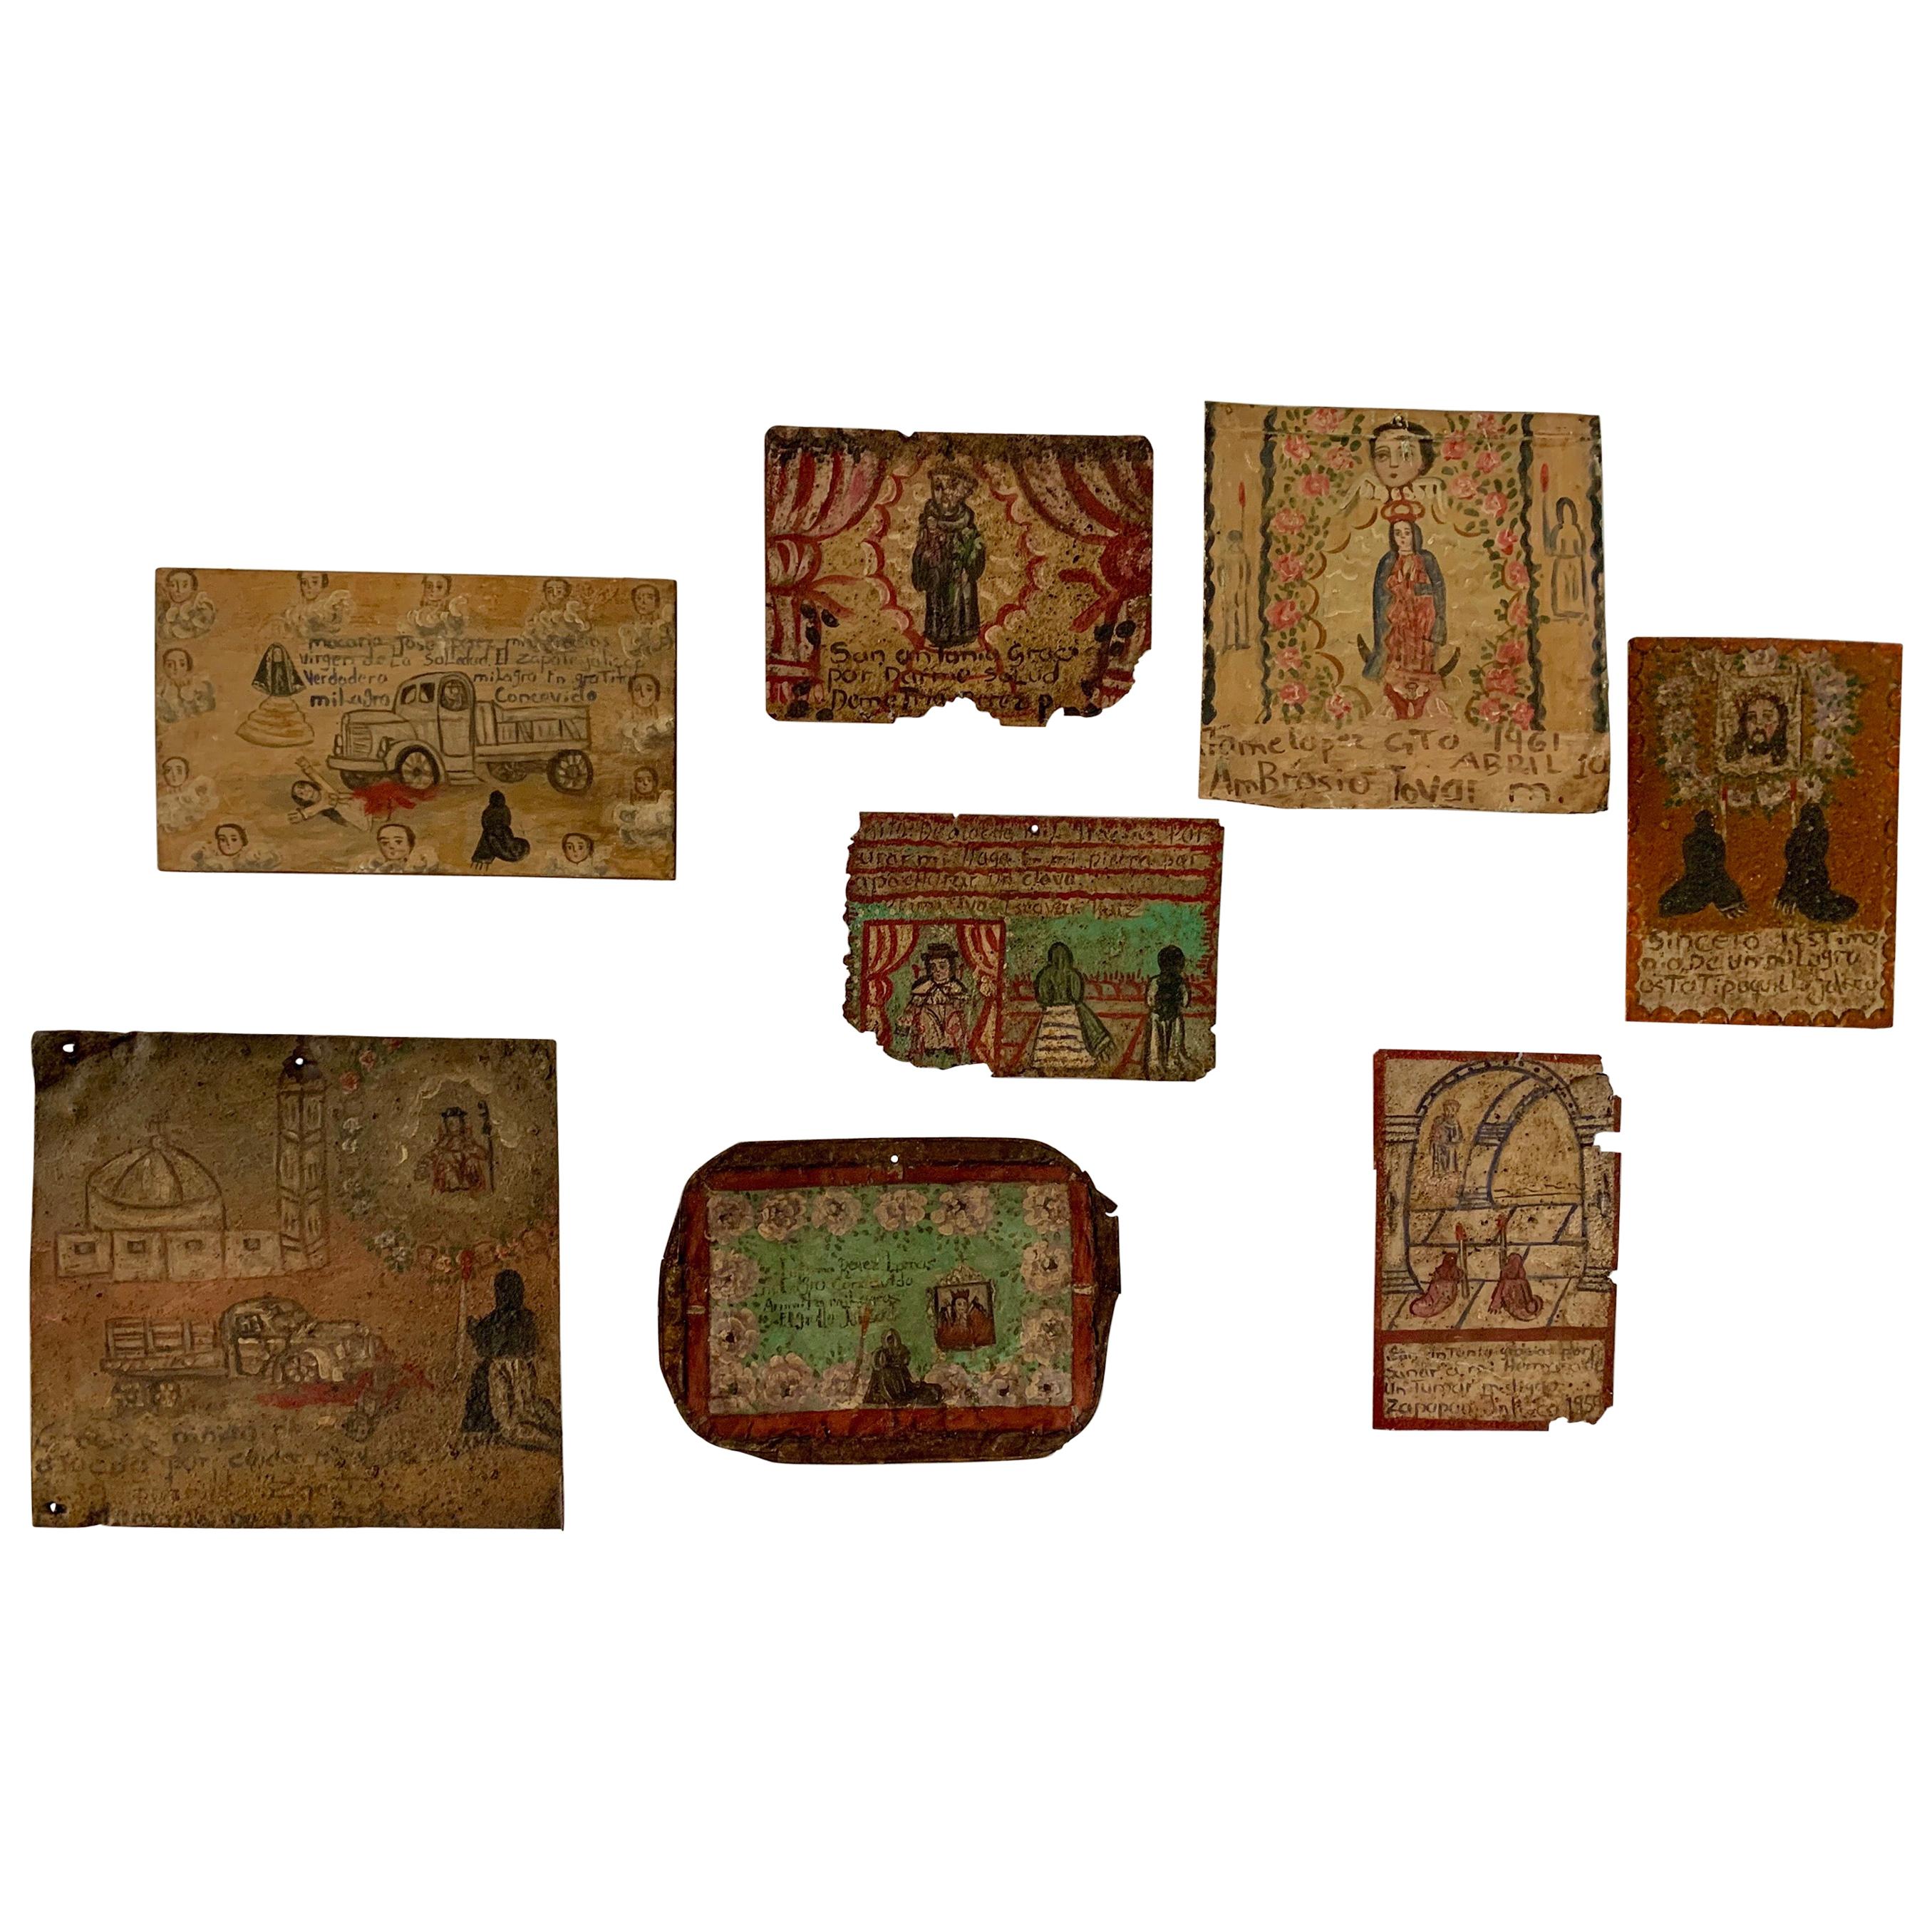 Collection of Mexican Prayer Plaques "Retablos Ex-Votos" from 1950s and 1960s